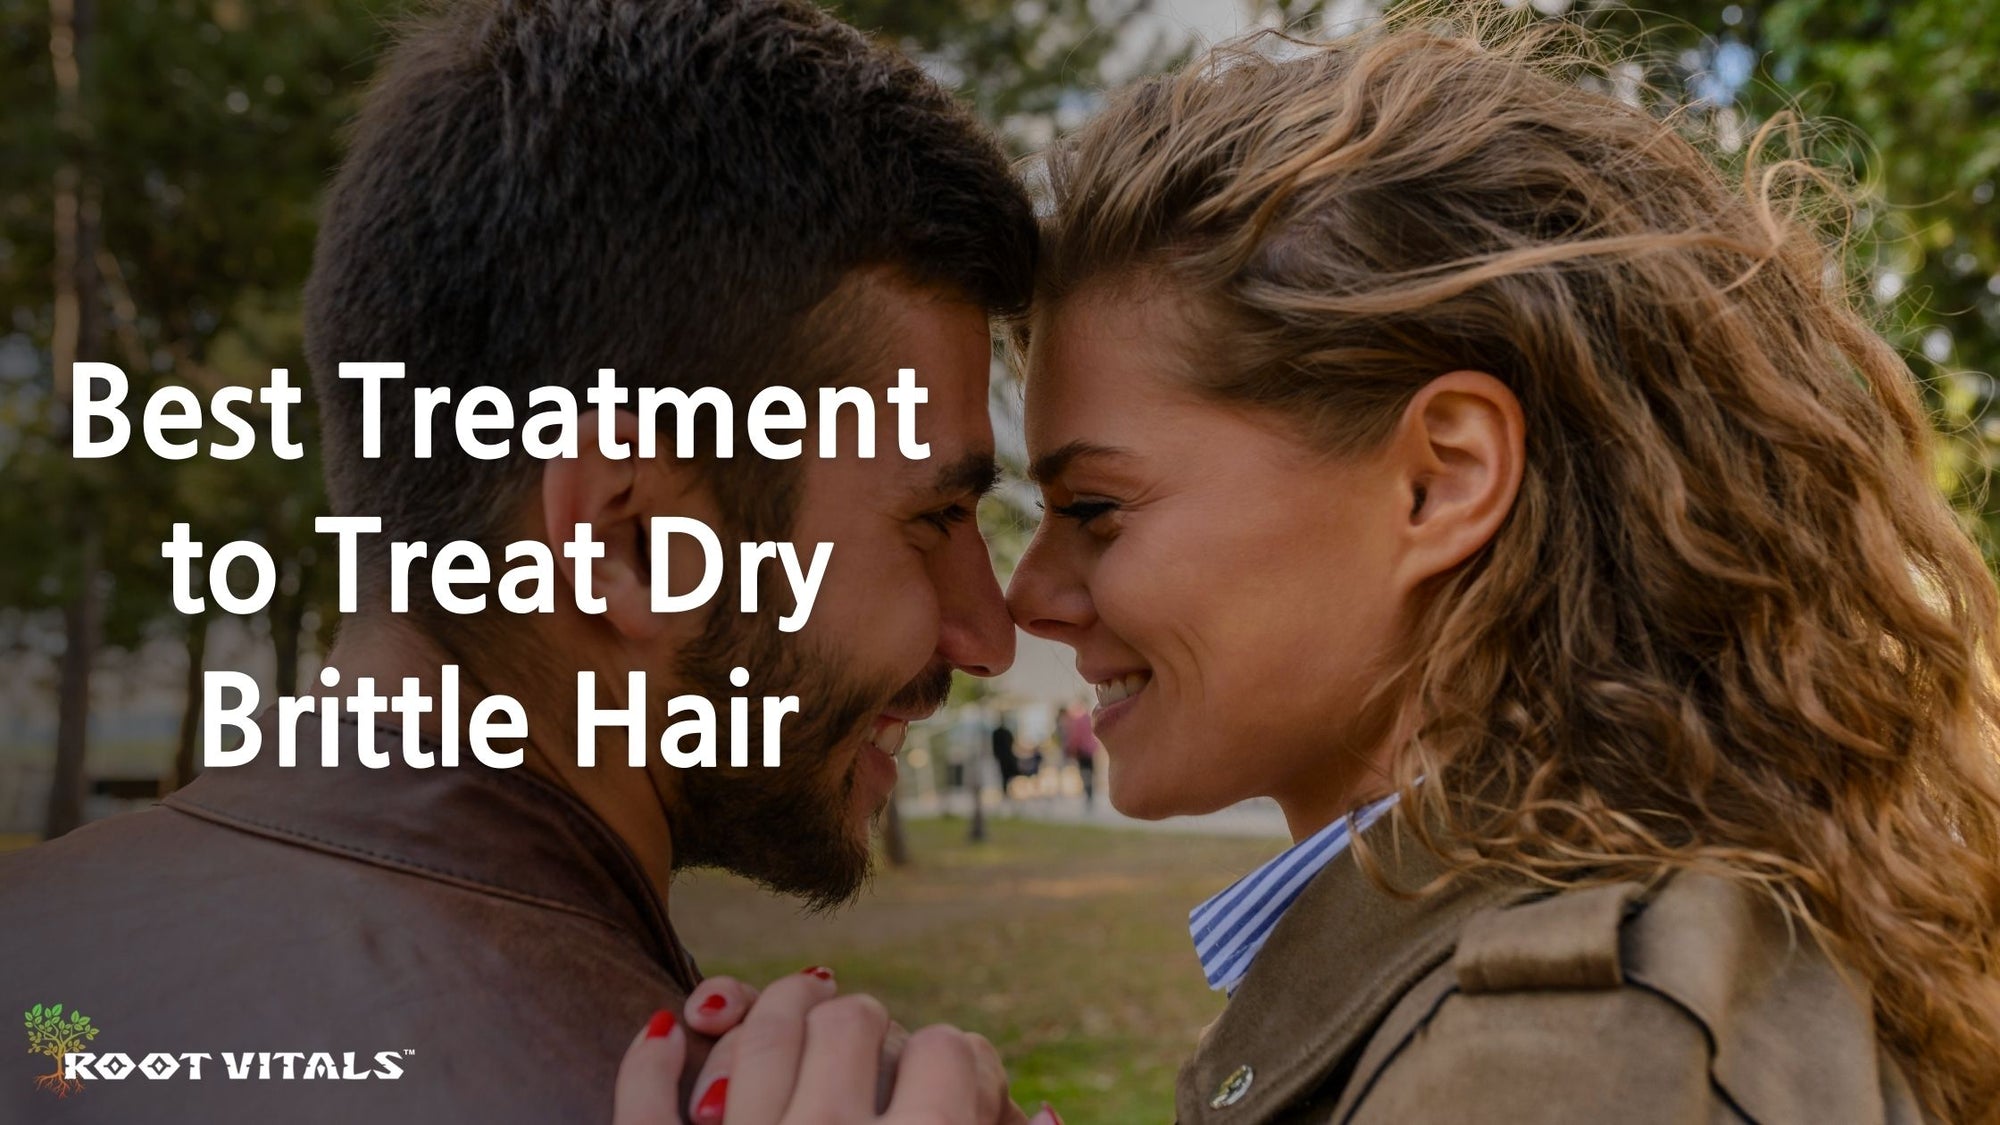 Best treatment options to treat dry brittle hair